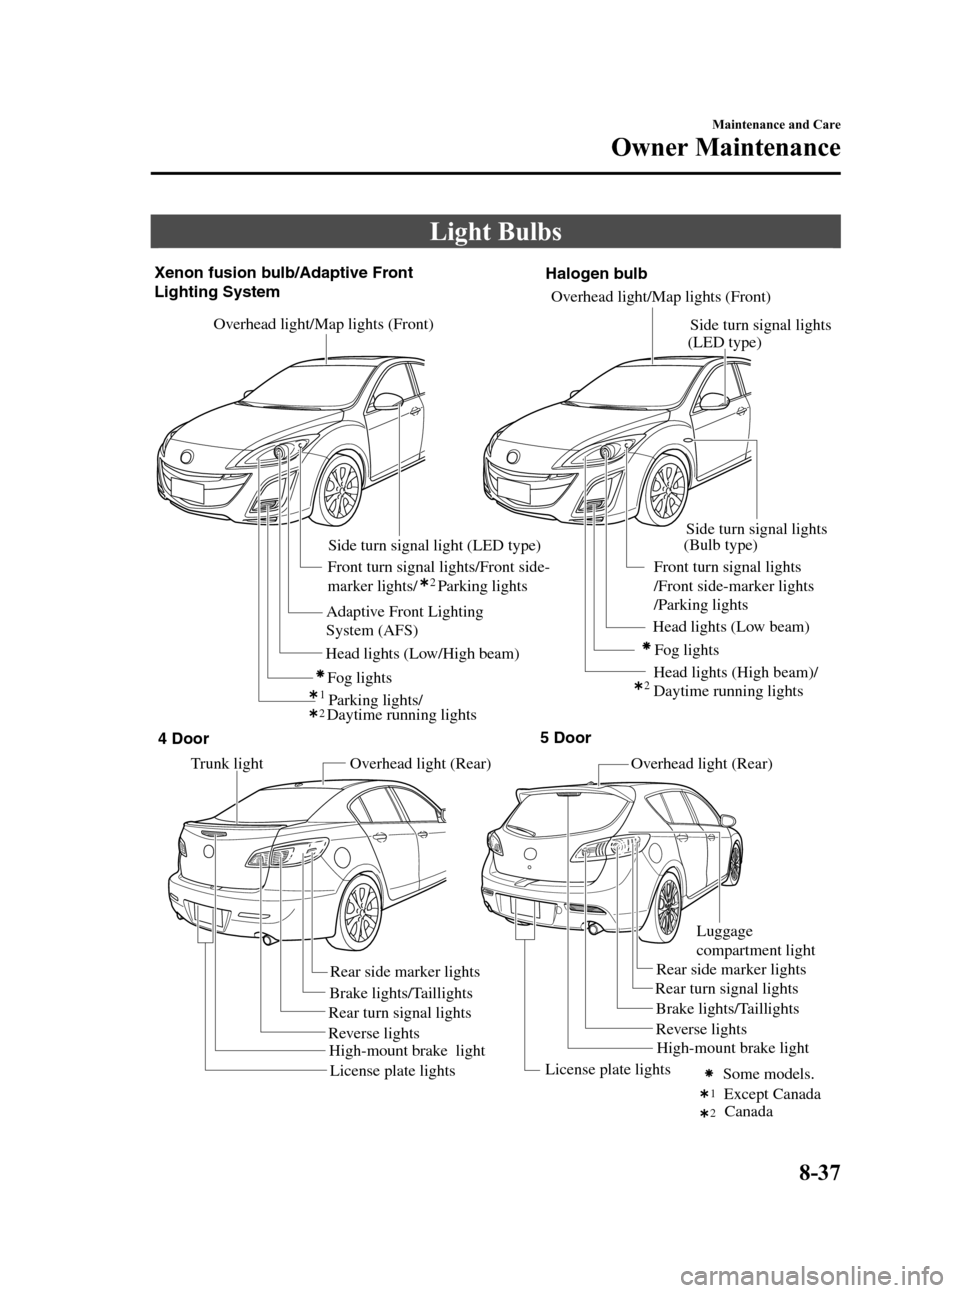 MAZDA MODEL 3 HATCHBACK 2010  Owners Manual (in English) Black plate (401,1)
Light Bulbs
Overhead light/Map lights (Front)
Overhead light (Rear) Overhead light (Rear) Front turn signal lights/Front side-
marker lights/     Parking lights Xenon fusion bulb/A